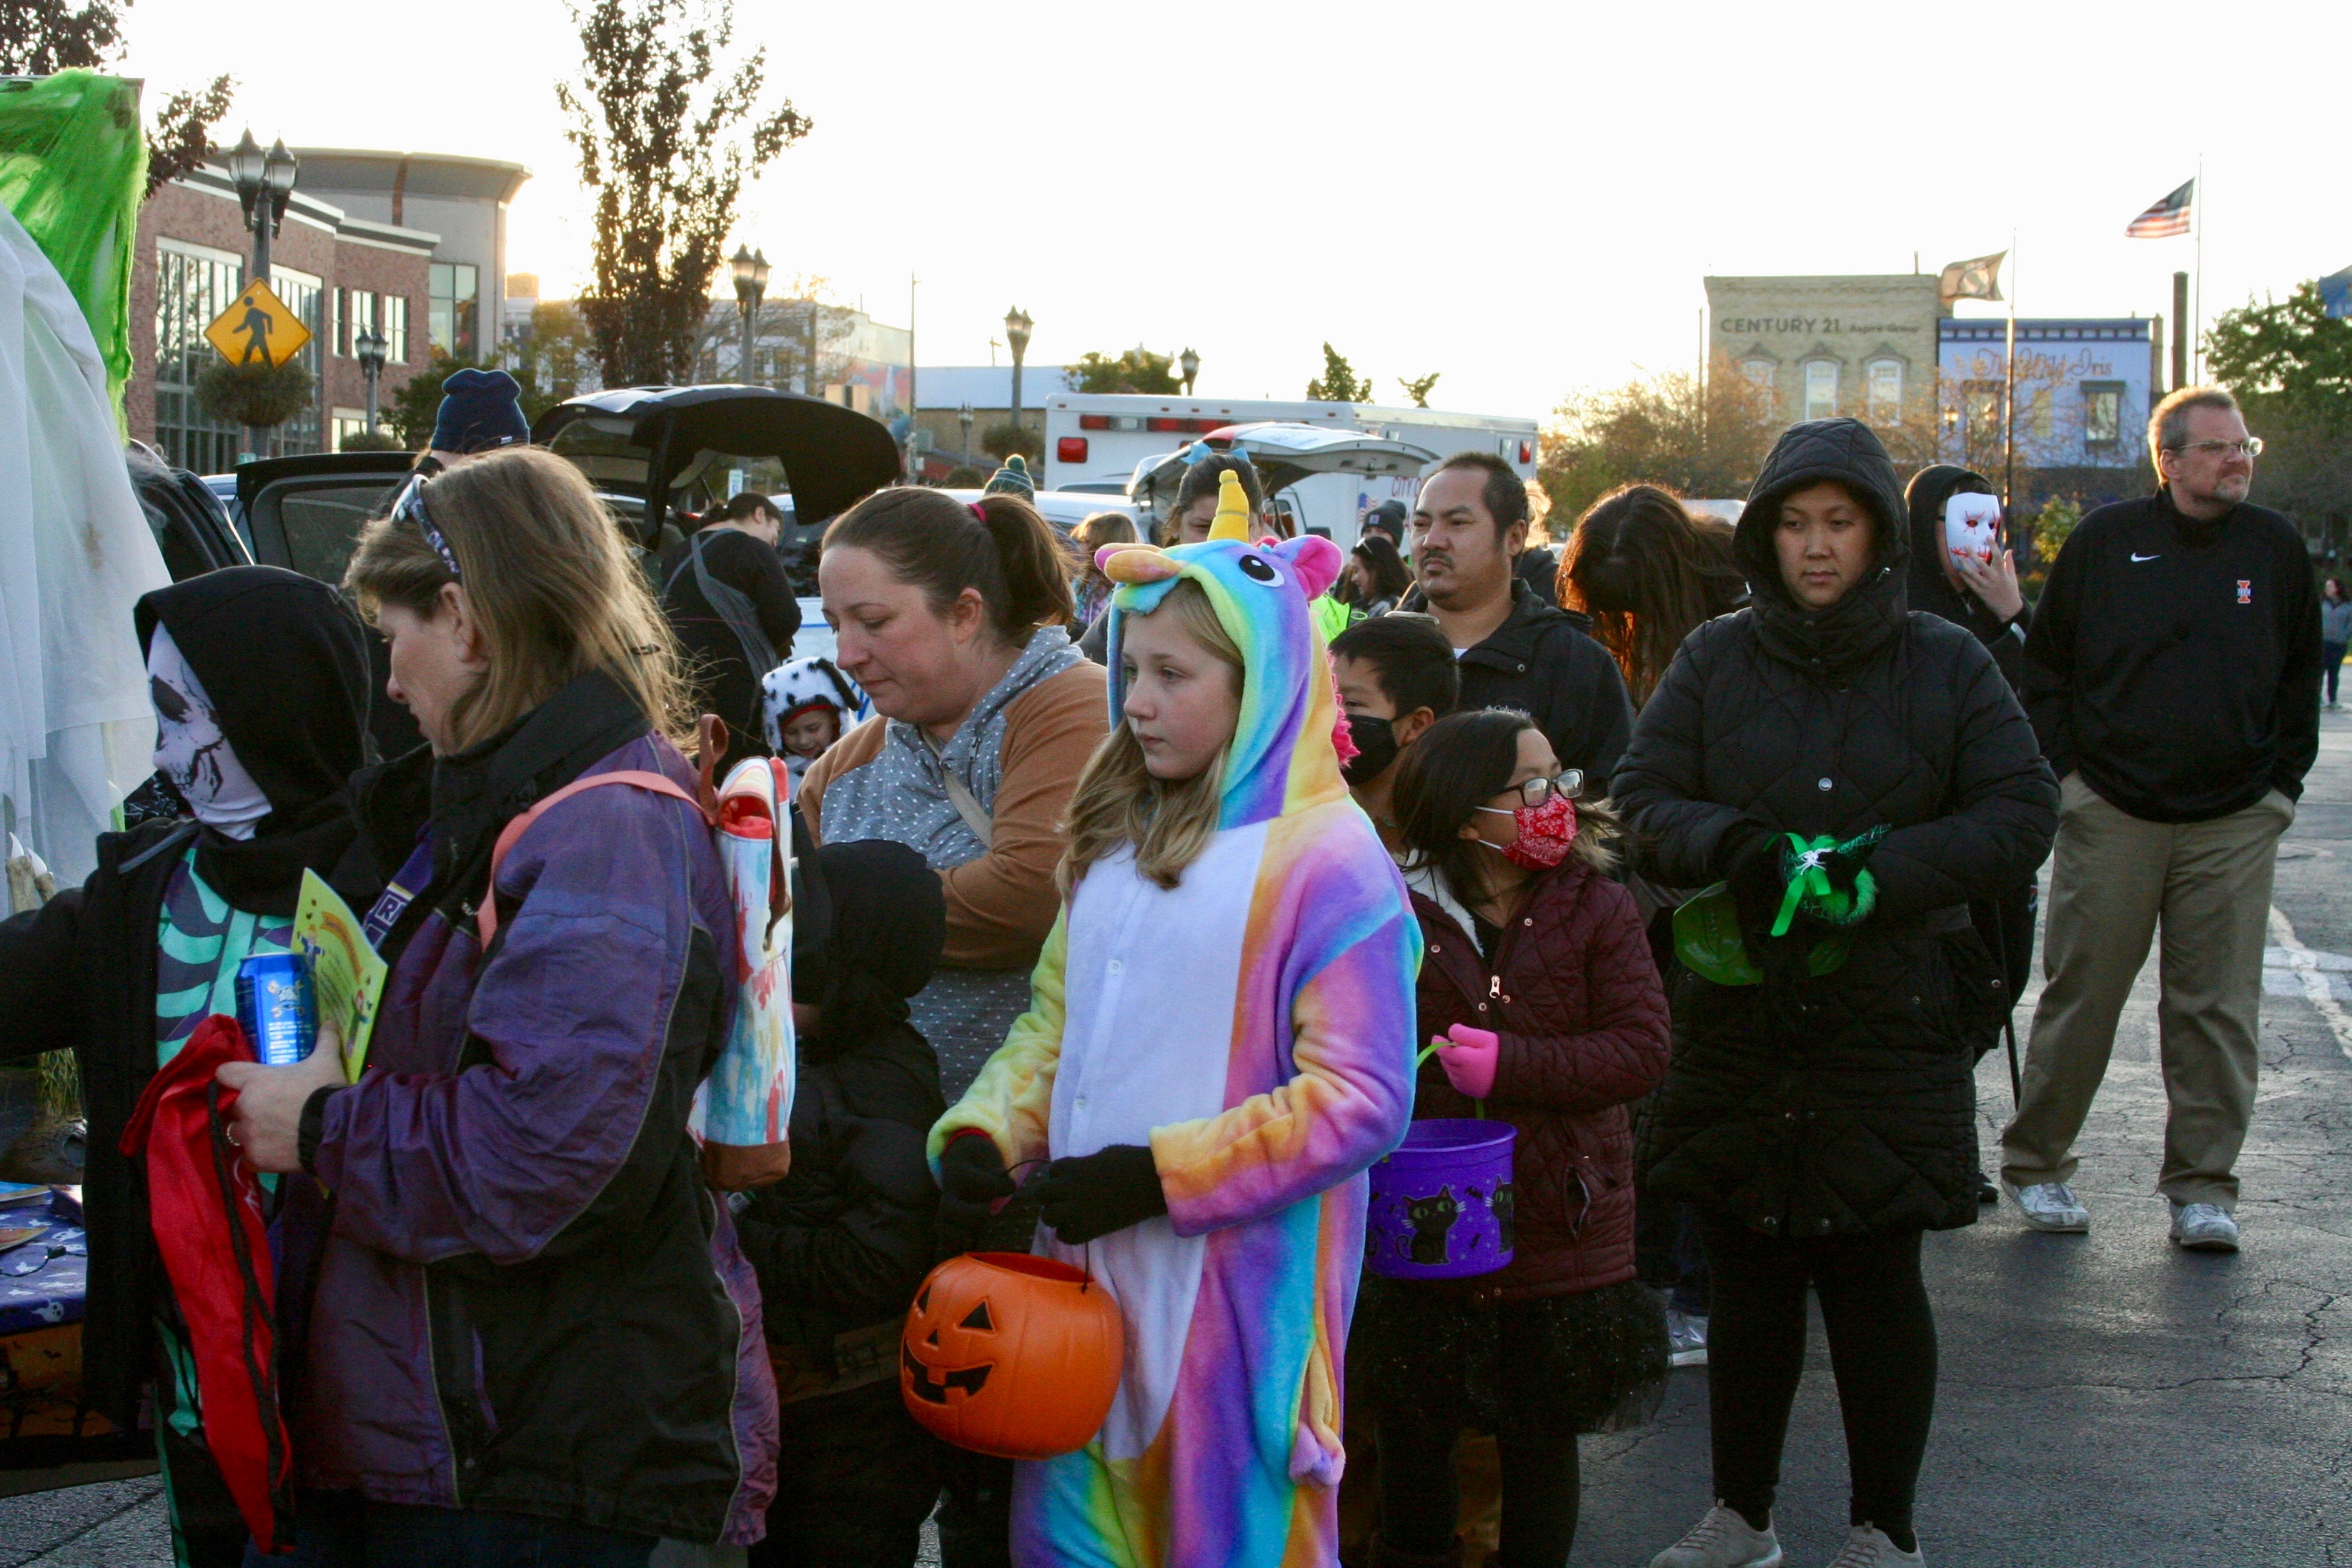 People lined up at trunk or treat event